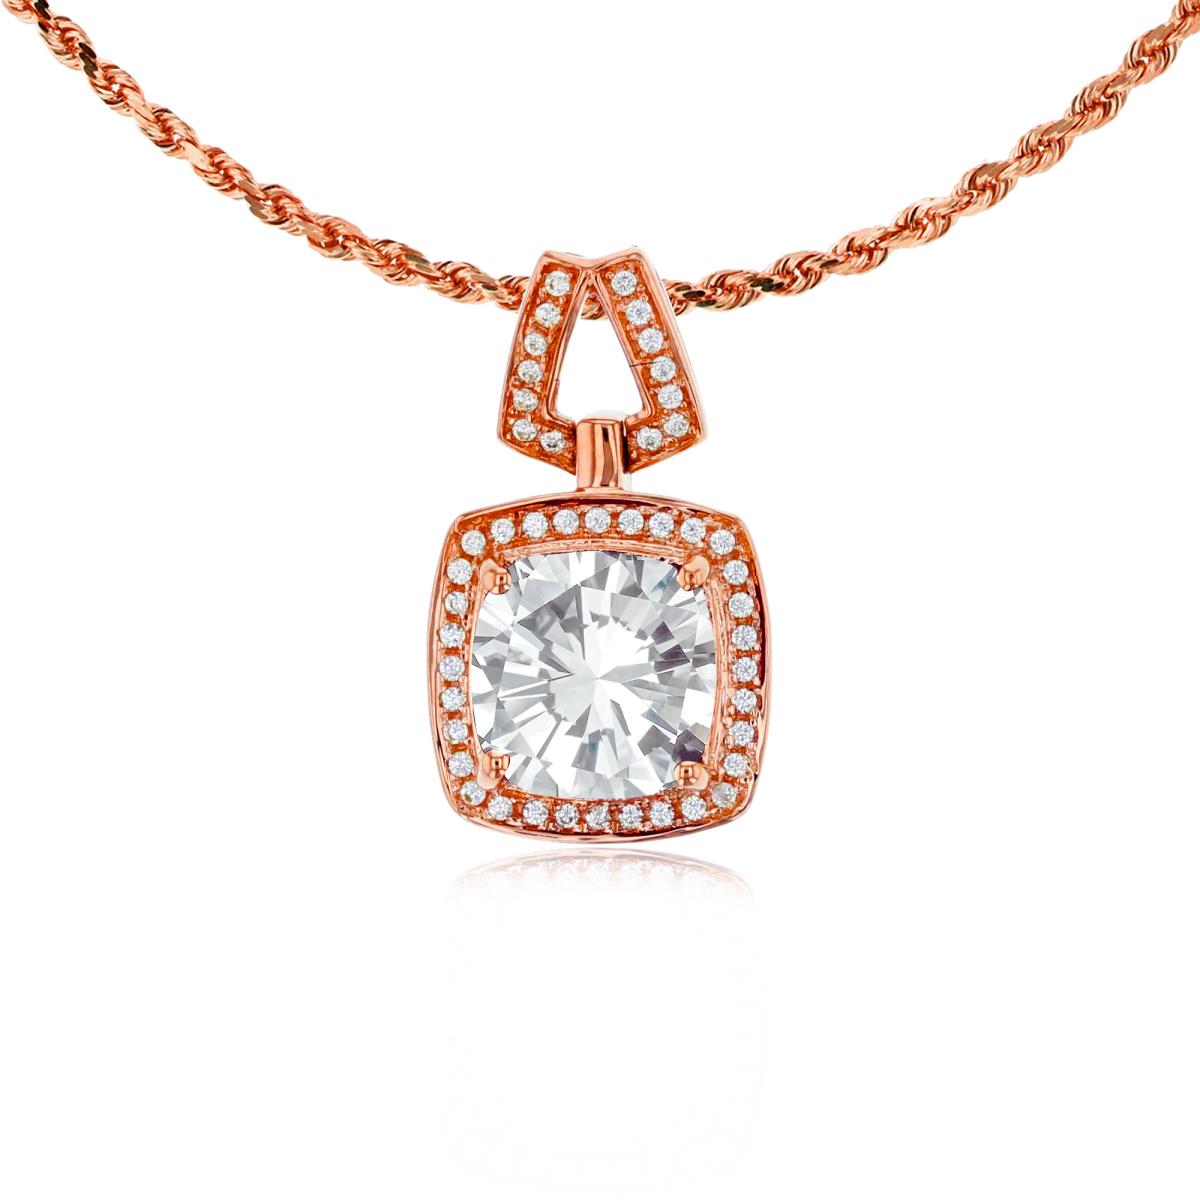 14K Rose Gold 7mm Cushion White Topaz & 0.10 CTTW Diamond Halo 18" Rope Chain Necklace